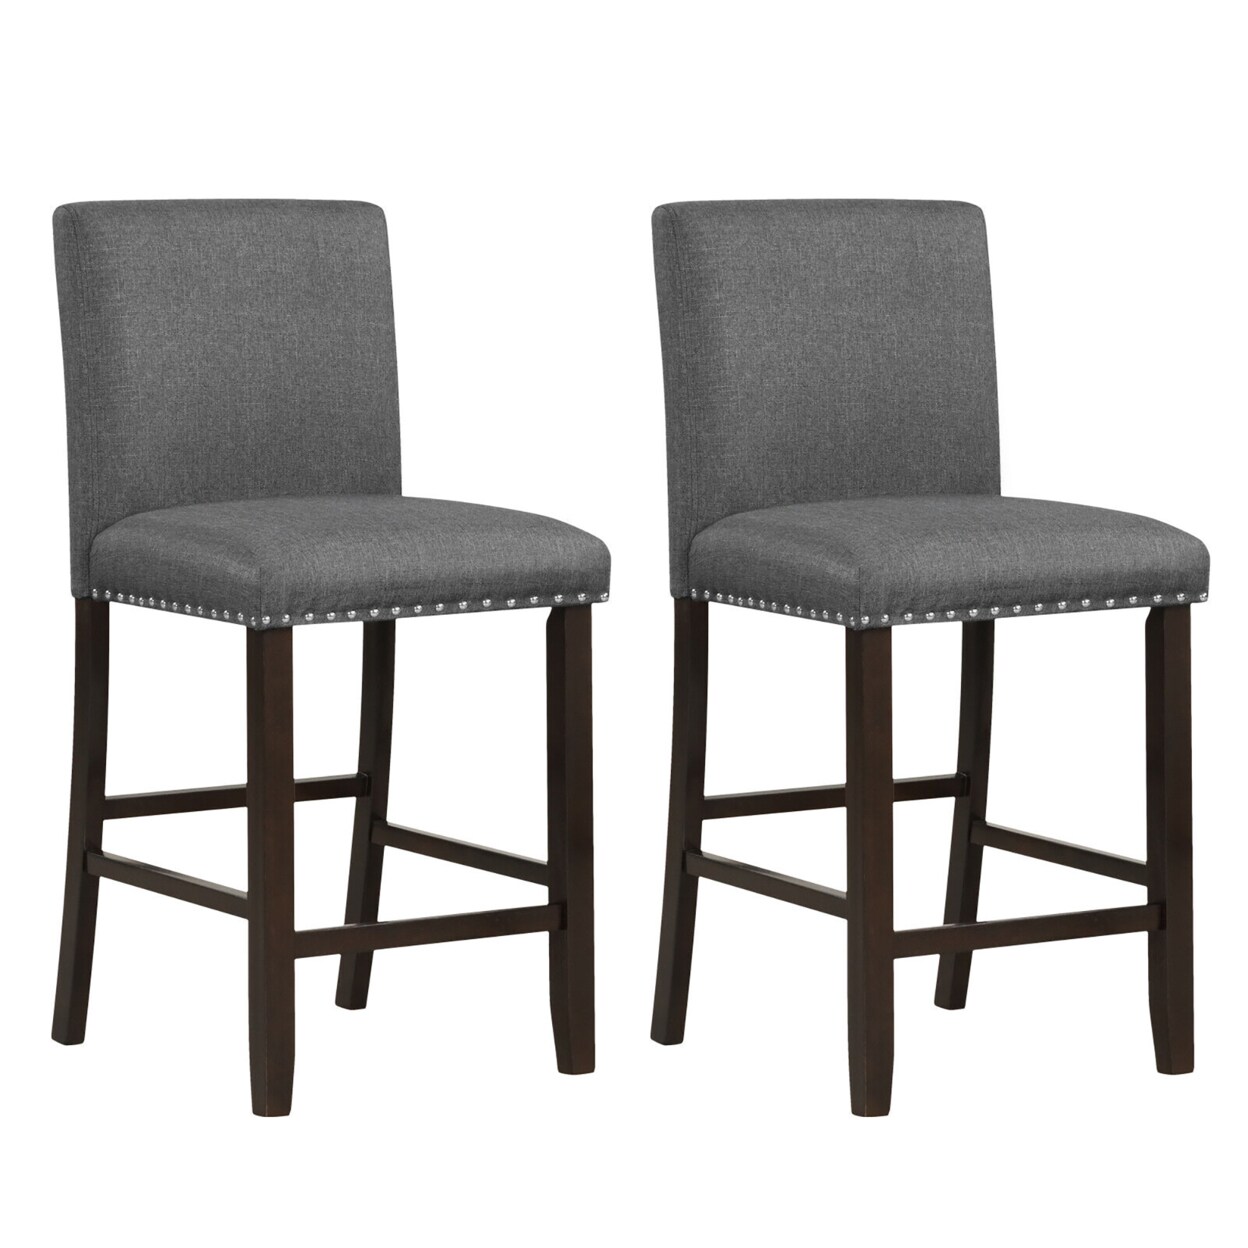 Gymax Set of 2 Bar Stools Linen Fabric Counter Height Chairs for Kitchen Island Grey